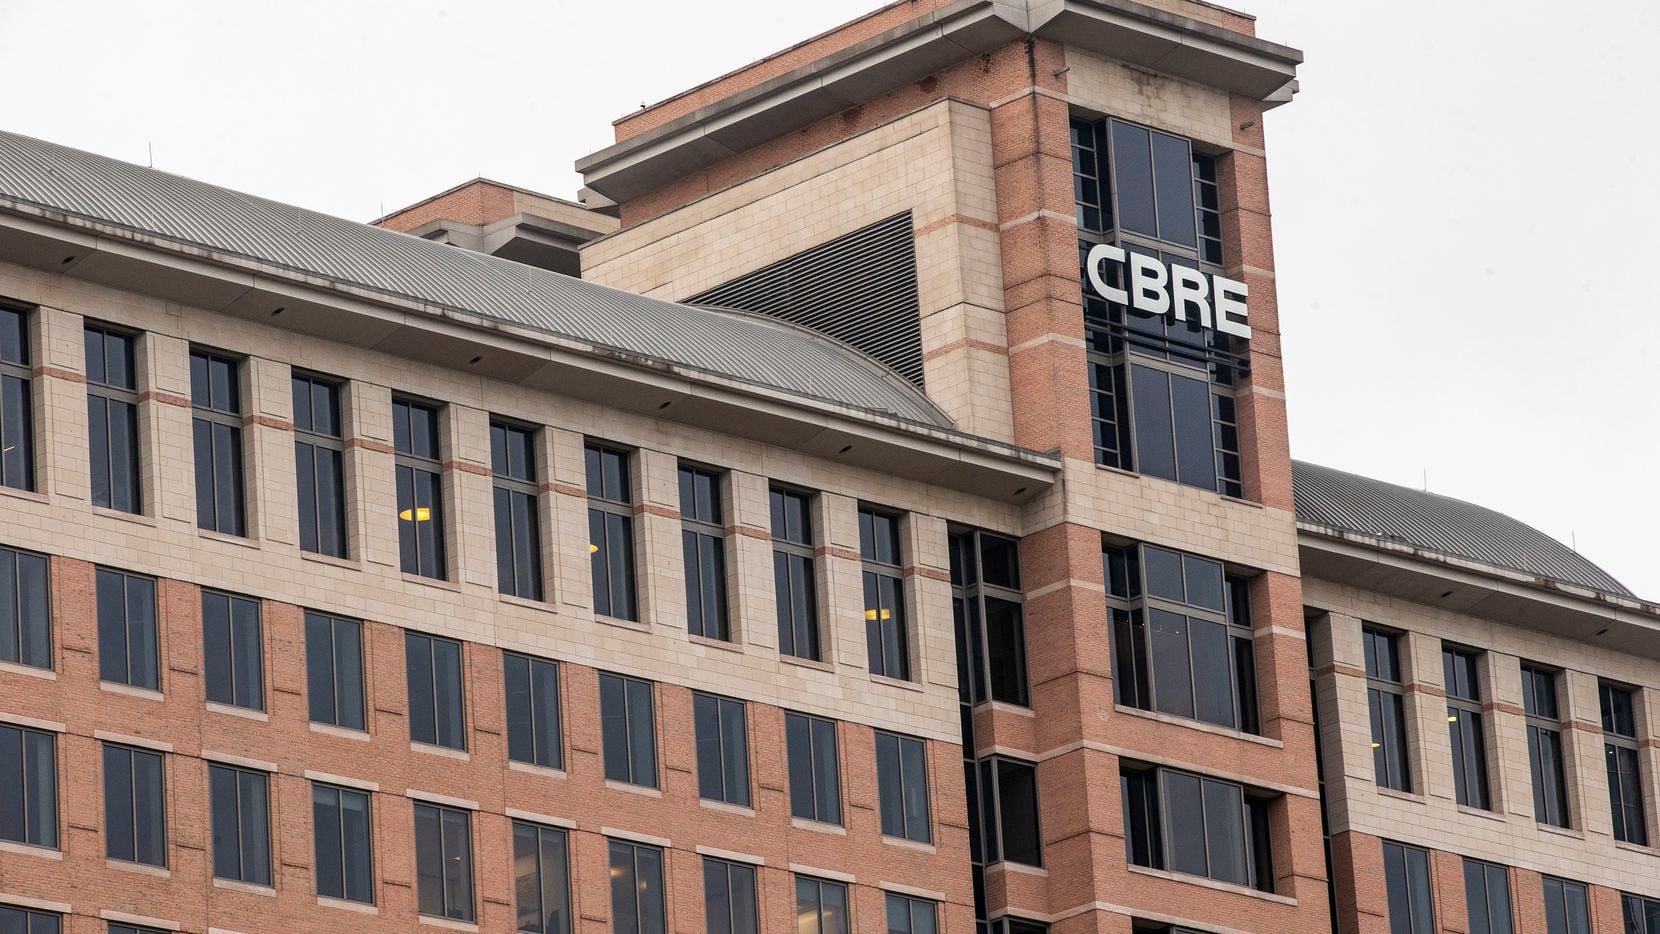 Dallas-based CBRE Group has about 115,000 workers worldwide.